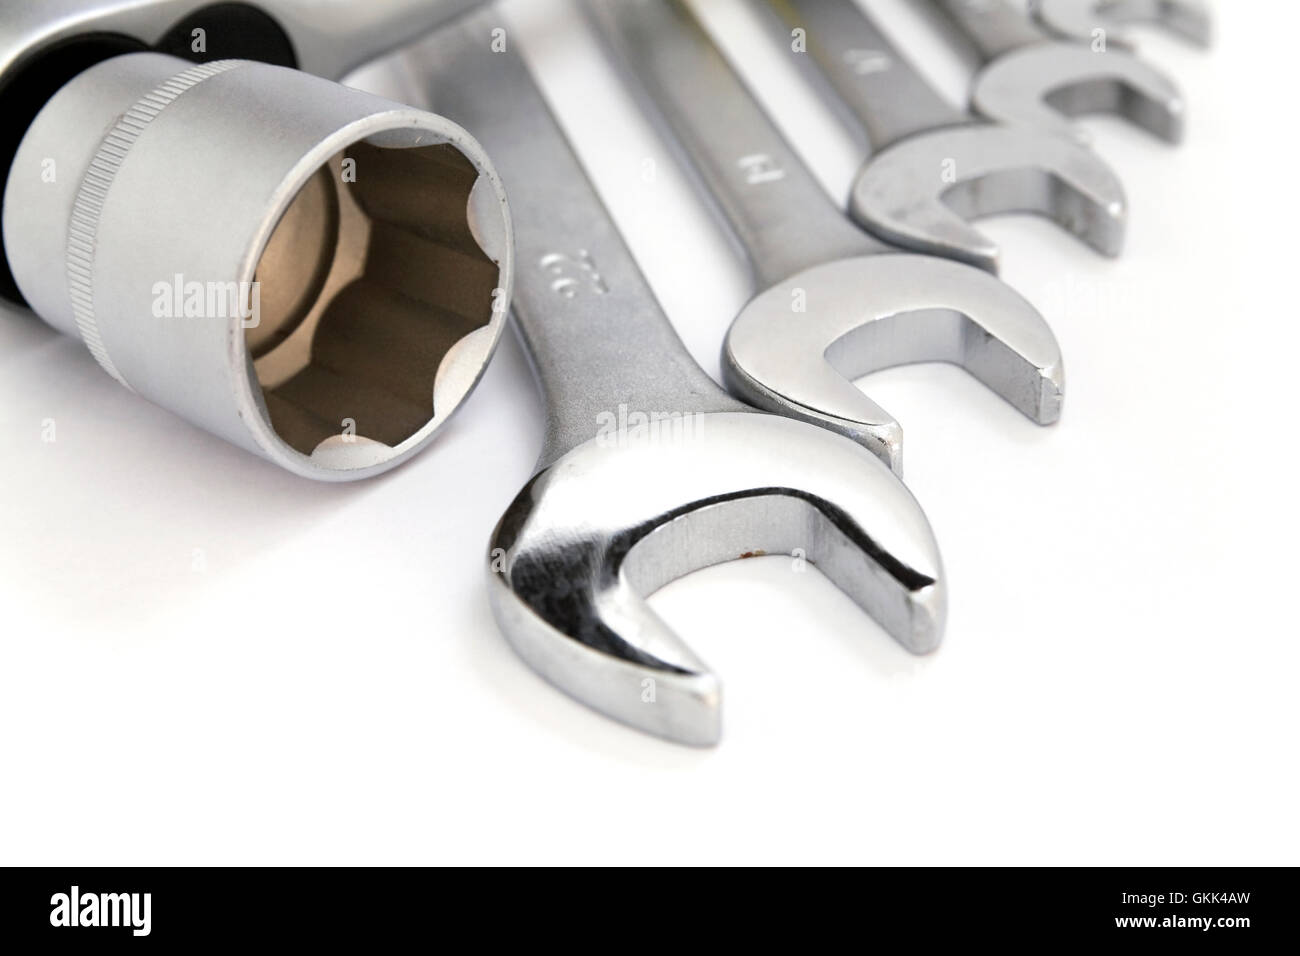 Set of metal tools on a white background Stock Photo